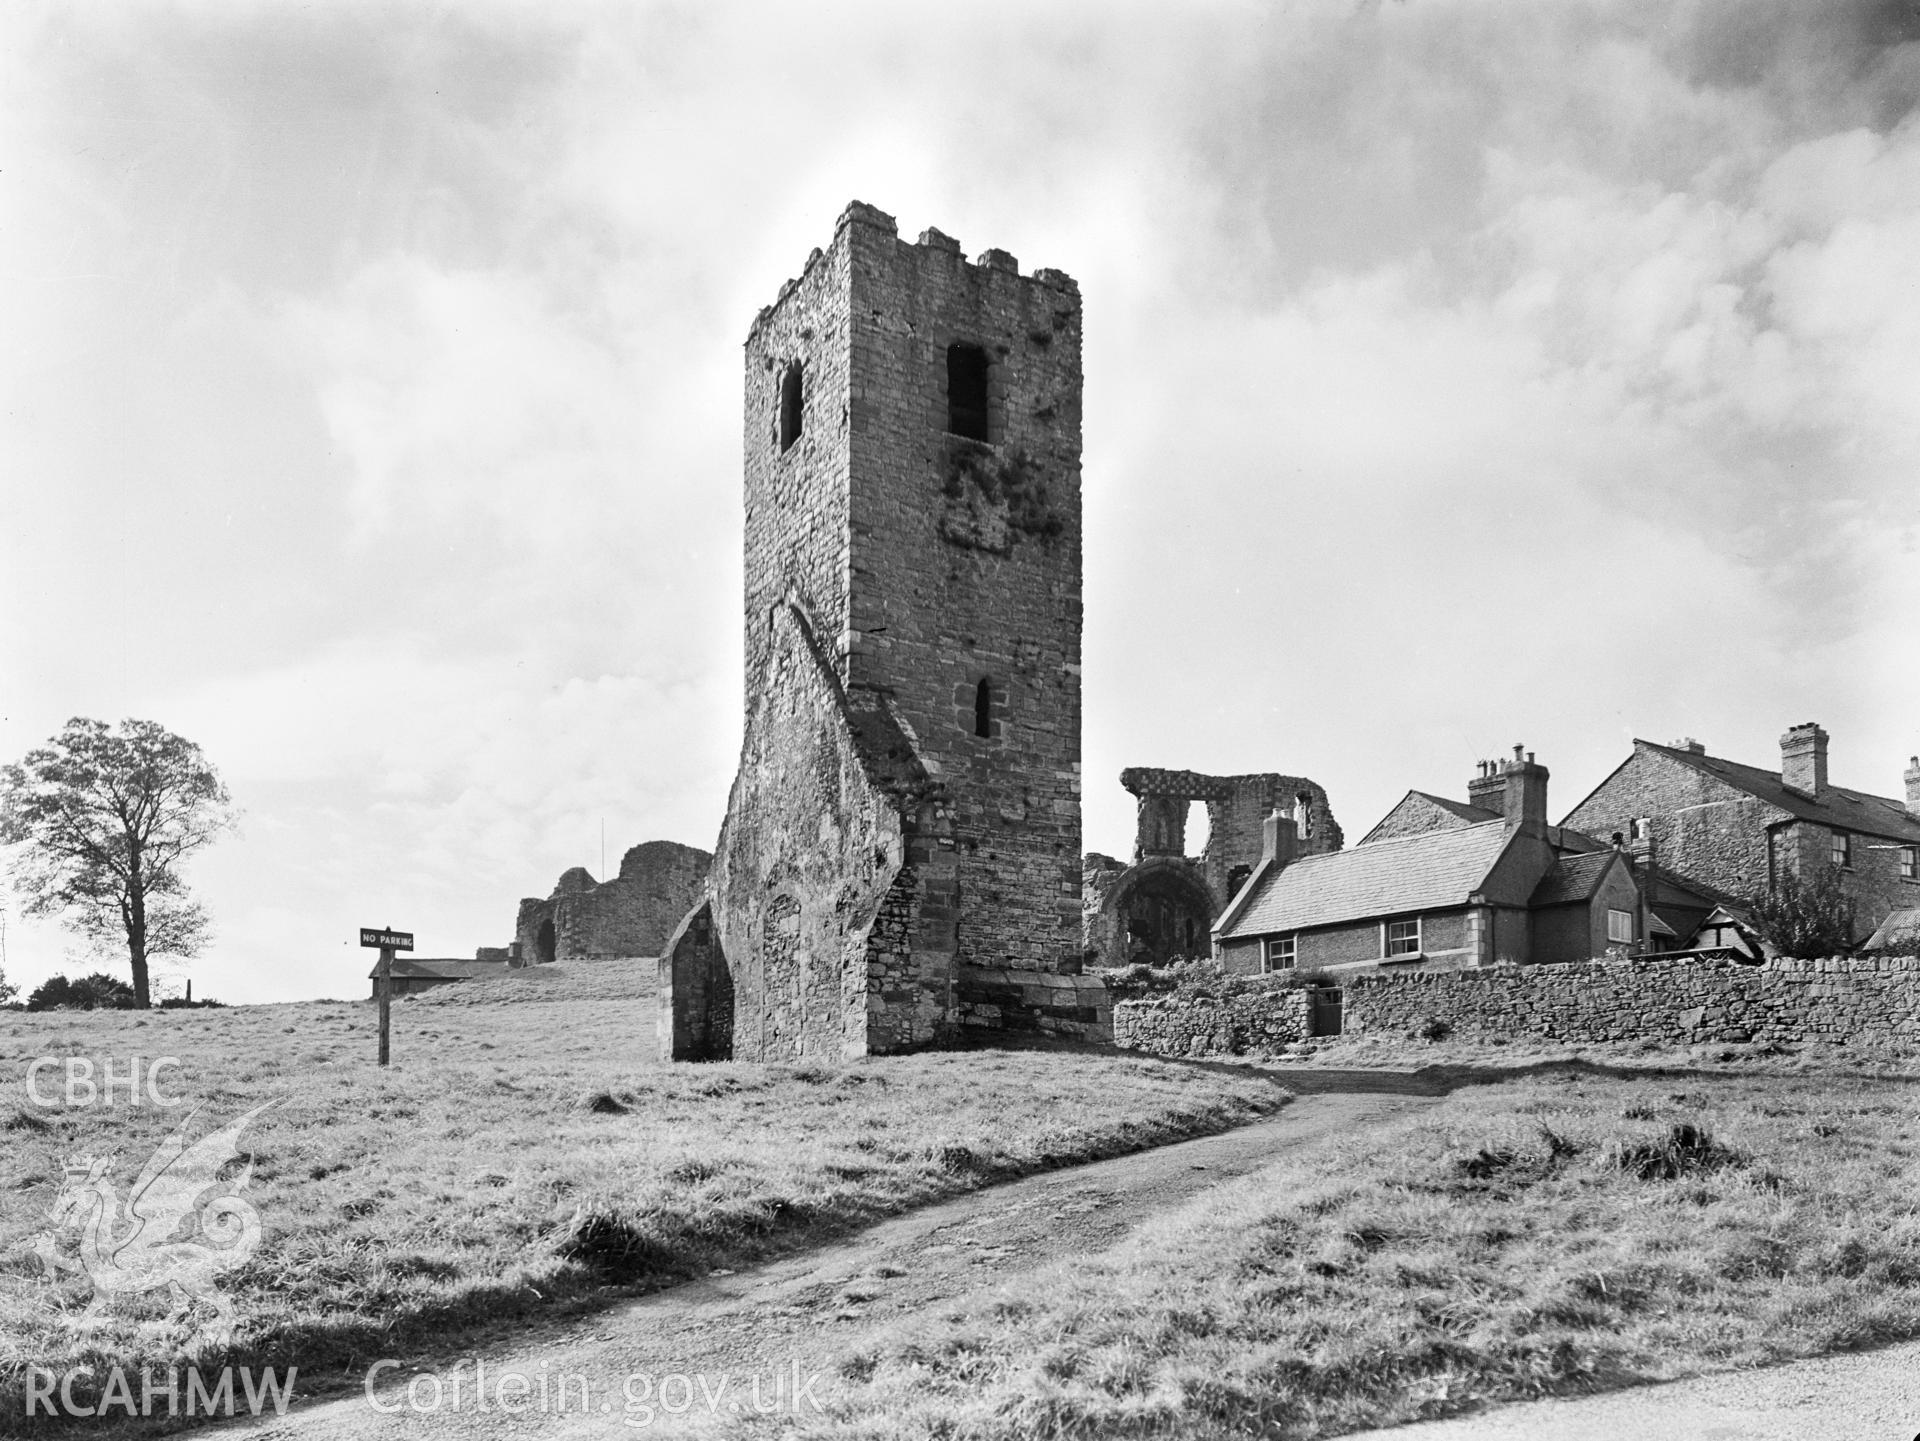 One black and white photograph of St Hilary's Chapel Tower, Denbigh.